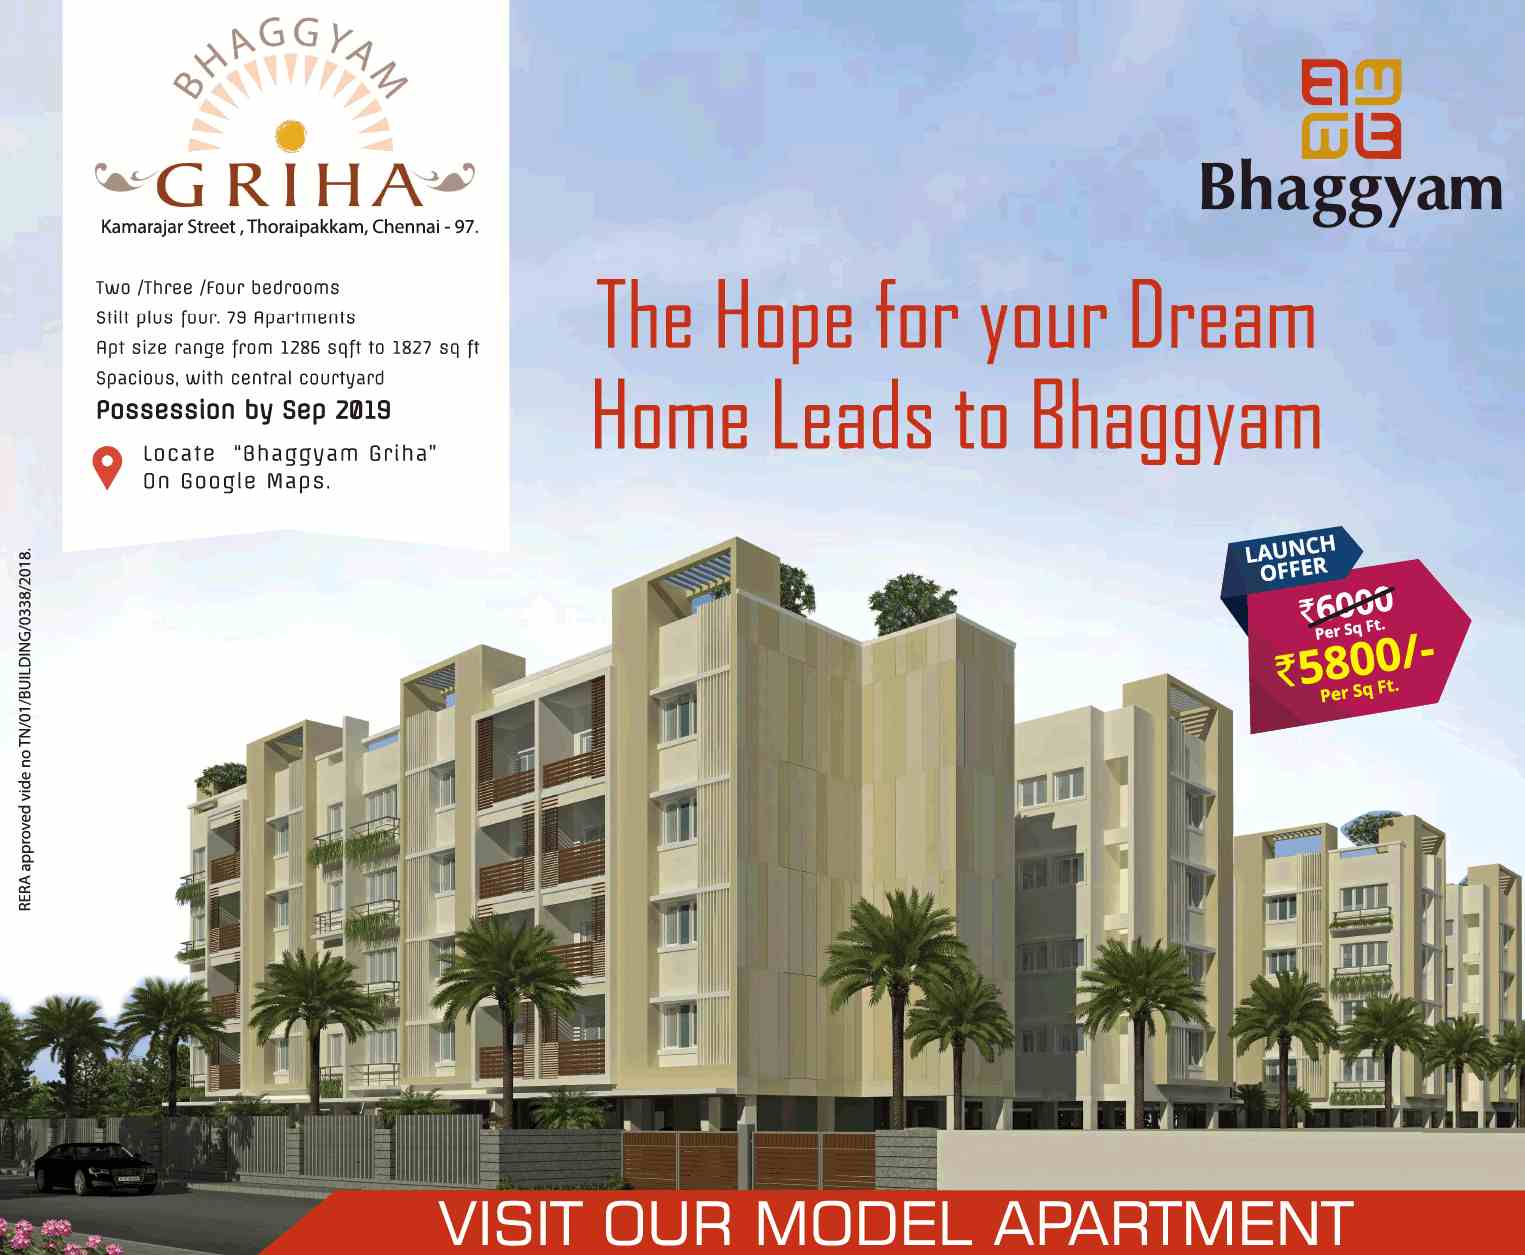 Grab the launch offer at Bhaggyam Griha in Chennai Update